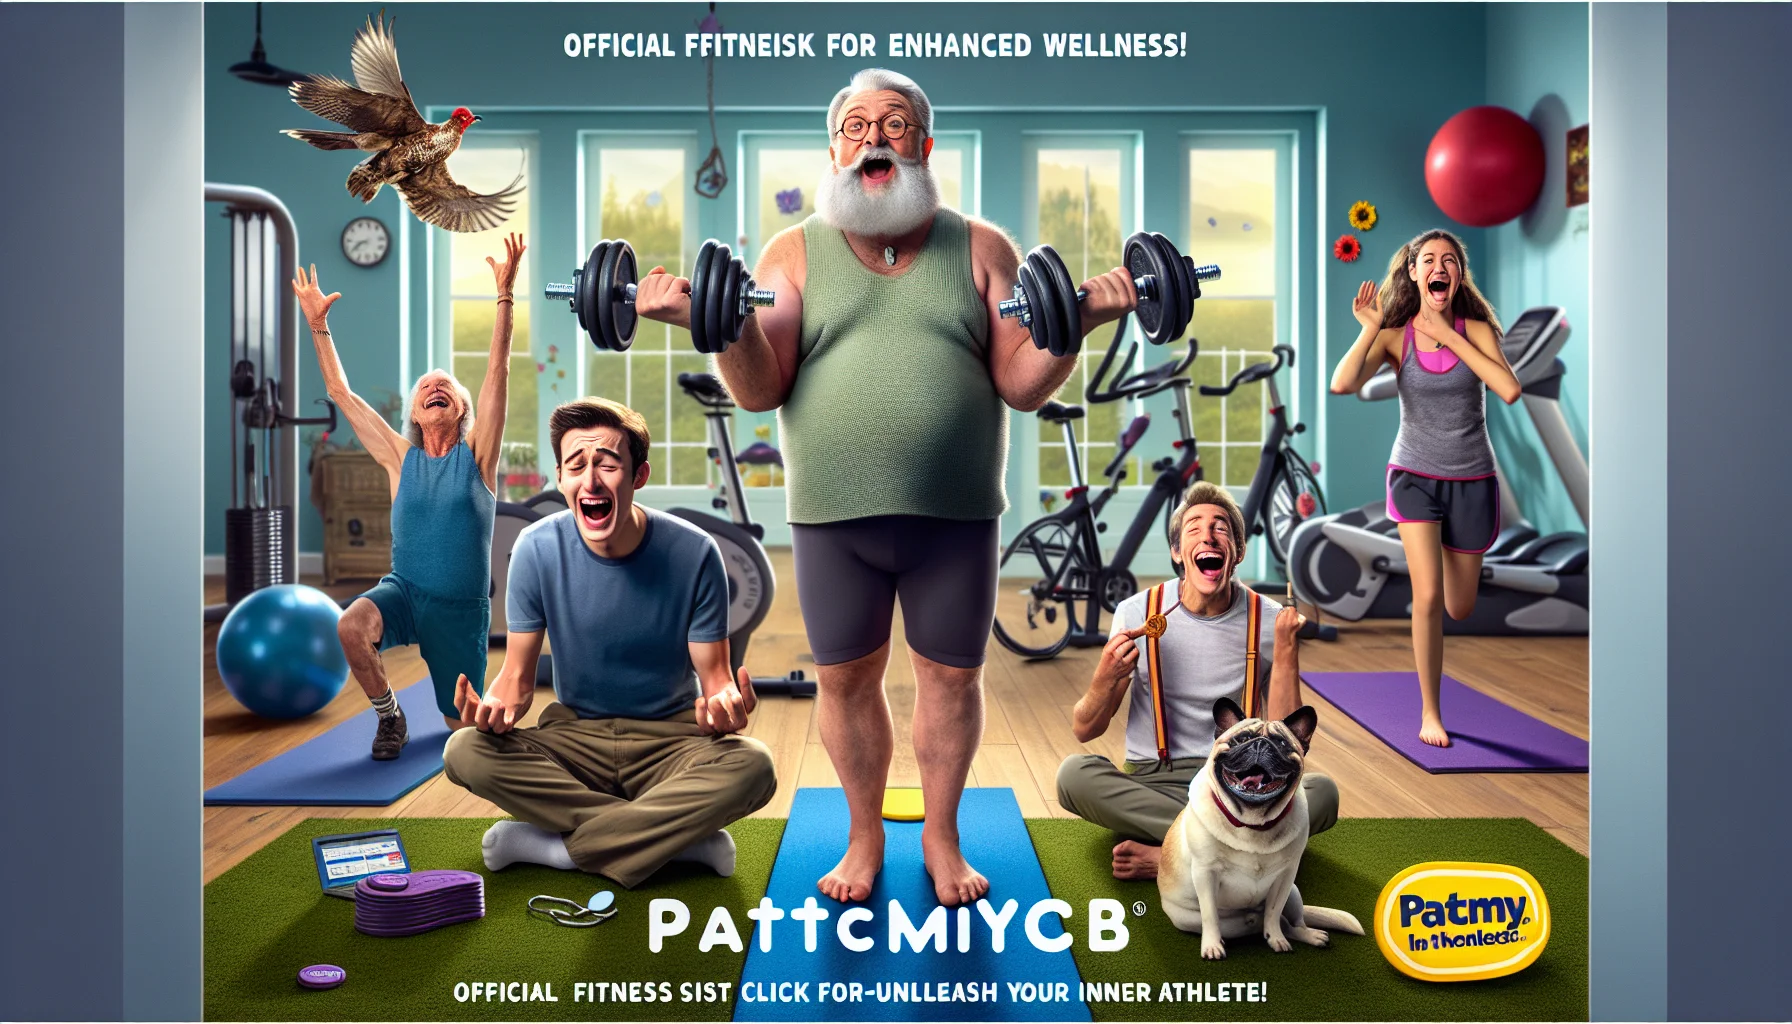 A humorous promotional image for a fictional wellness company called PatchMyCB. The image features a mismatched ensemble of unlikely fitness enthusiasts: a robust elderly man lifting a surprisingly heavy dumbbell, a skinny teenager attempting yoga, a casually dressed young woman laughing as she tries to ride a stationary bike, and a dog attempting to catch a frisbee mid-air. The backdrop is a brightly lit gym environment, filled with exercise equipment. A bold tagline reads 'PatchMyCB: Official Fitness Click for Enhanced Wellness - Unleash Your Inner Athlete!'